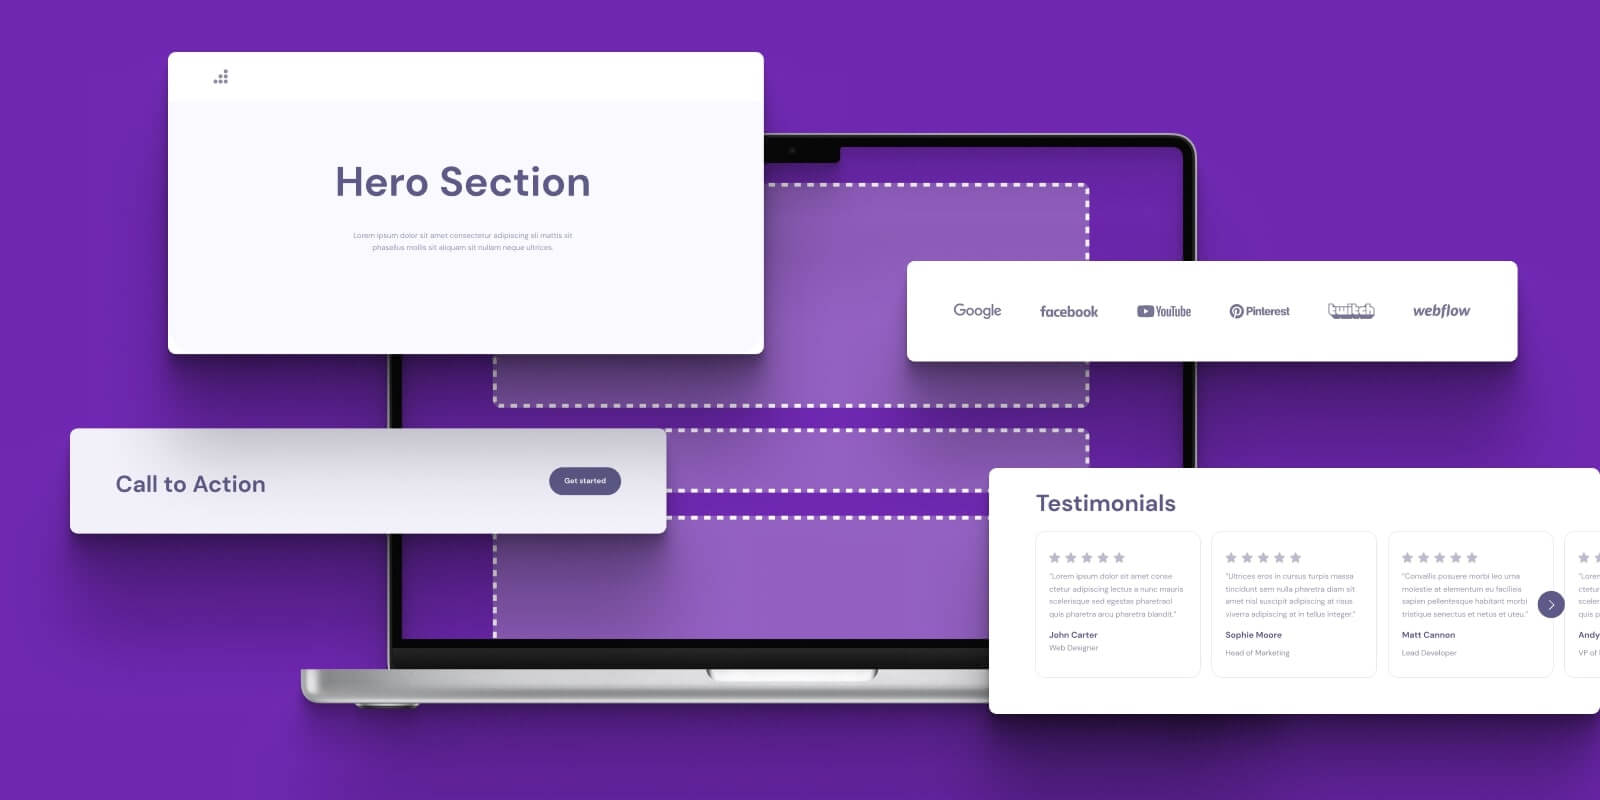 Divi 3.0 Has Arrived! Introducing The Visual Page Builder So